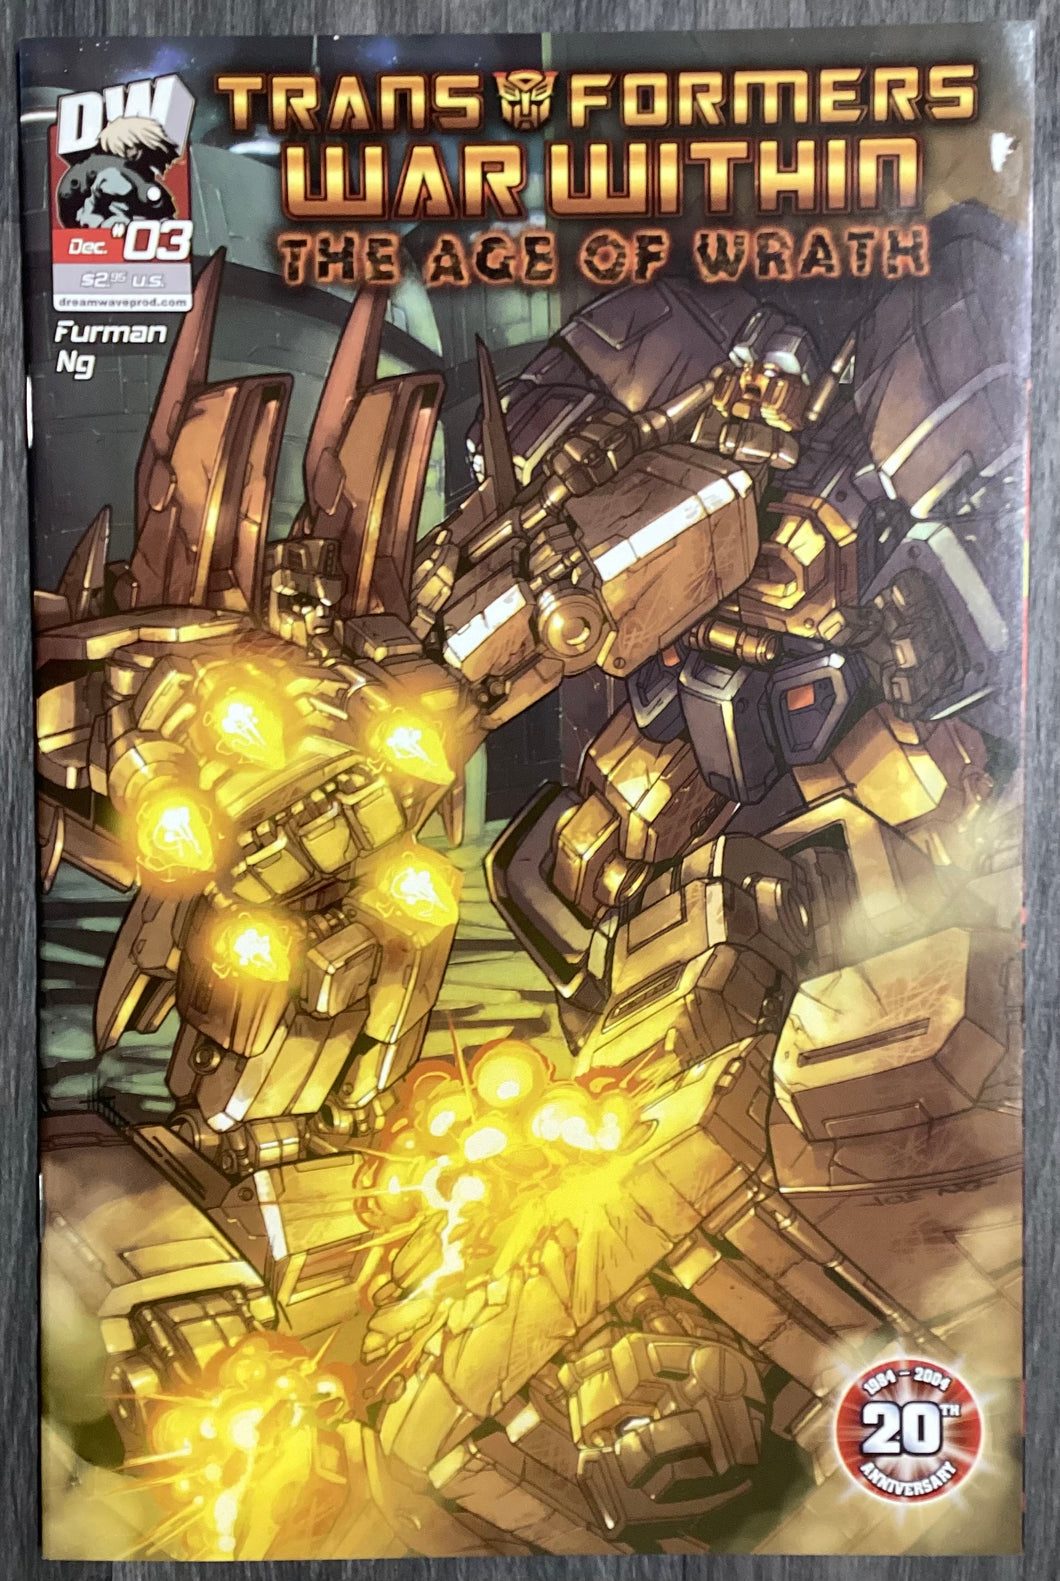 The Transformers War Within: The Age of Wrath No. #3 2004 Dreamwave Productions